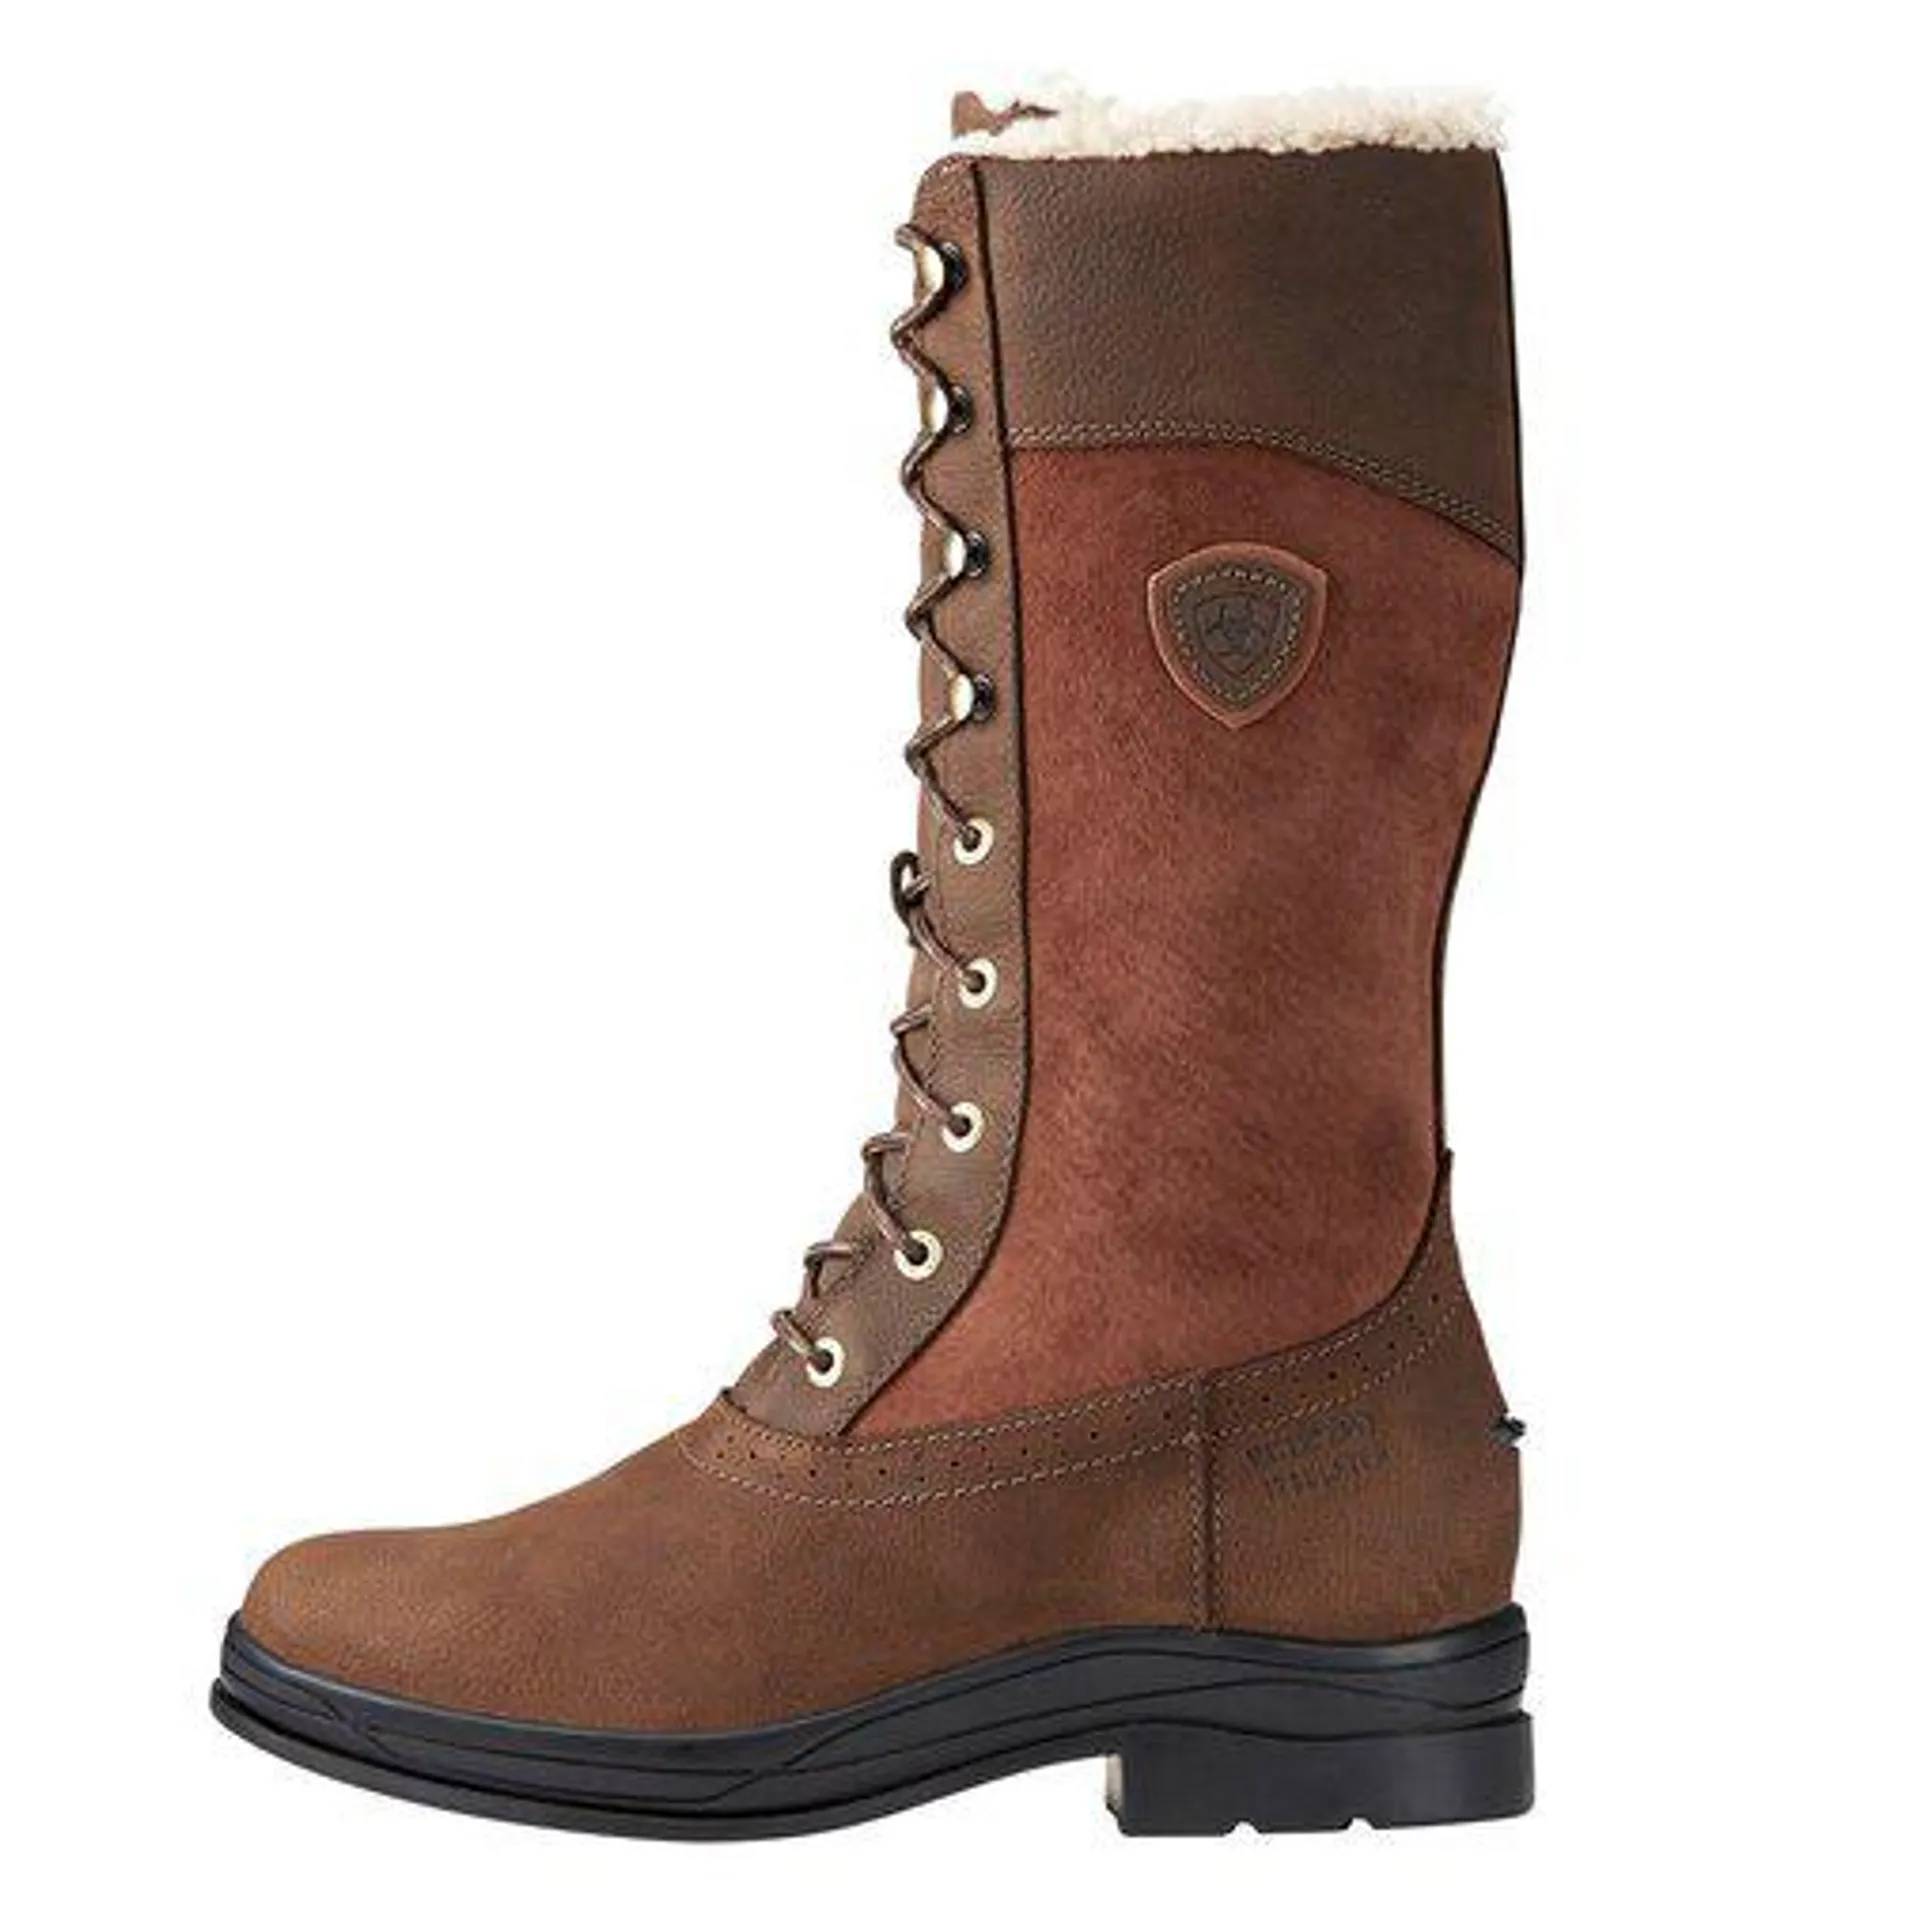 Ariat Wythburn H2O Insulated Ladies Country Boots - Java